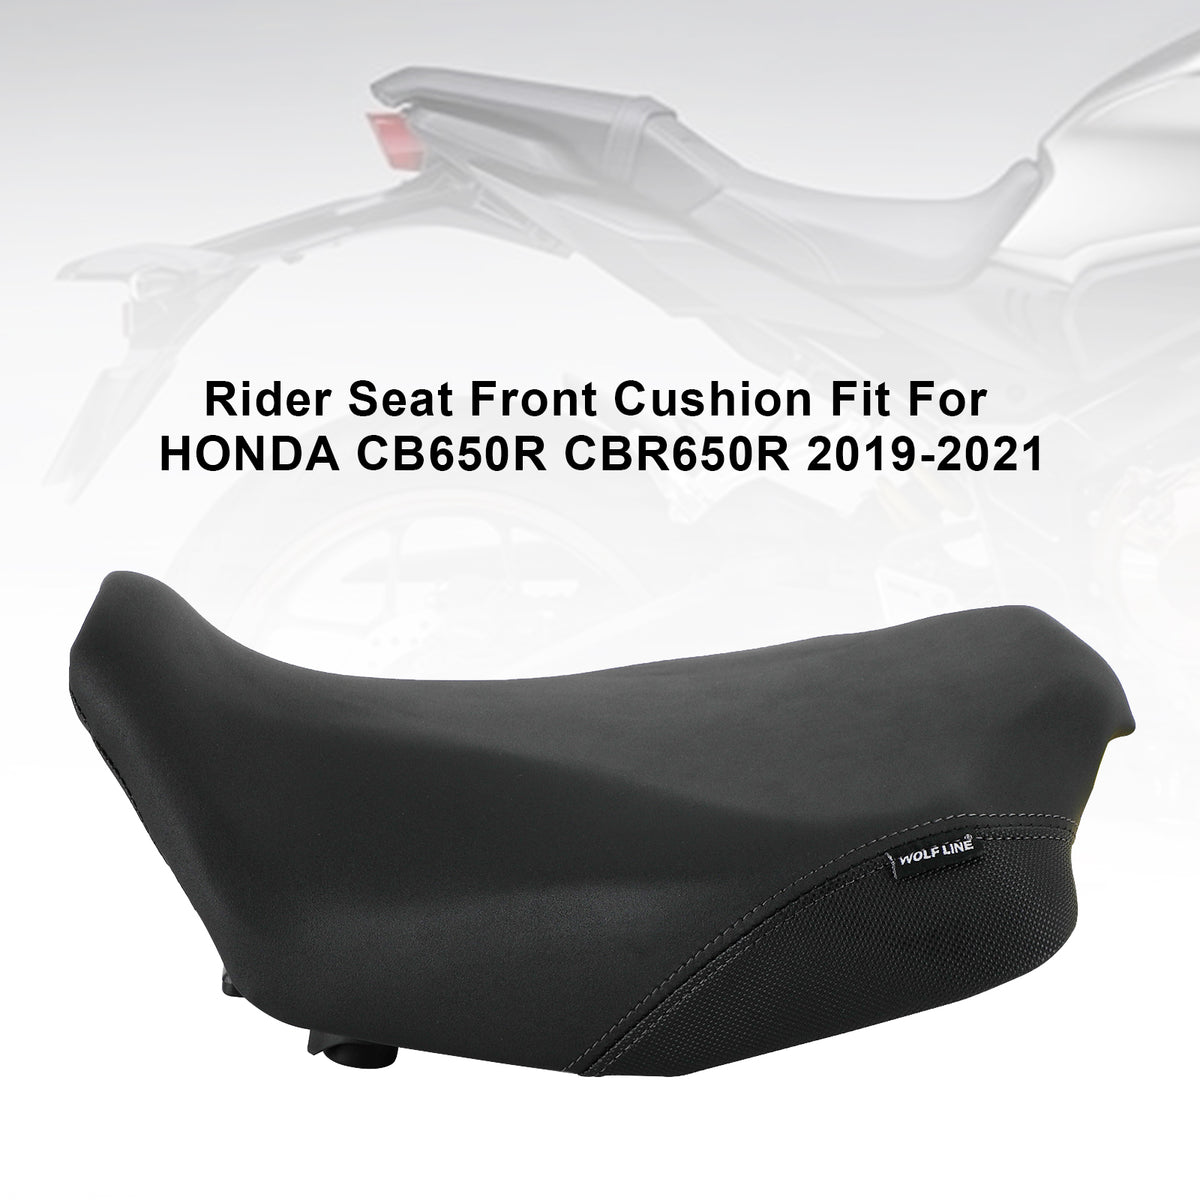 Complete Cushion Rider Passenger Seat Fits For HONDA CB CBR 650R 19-21 Red Generic